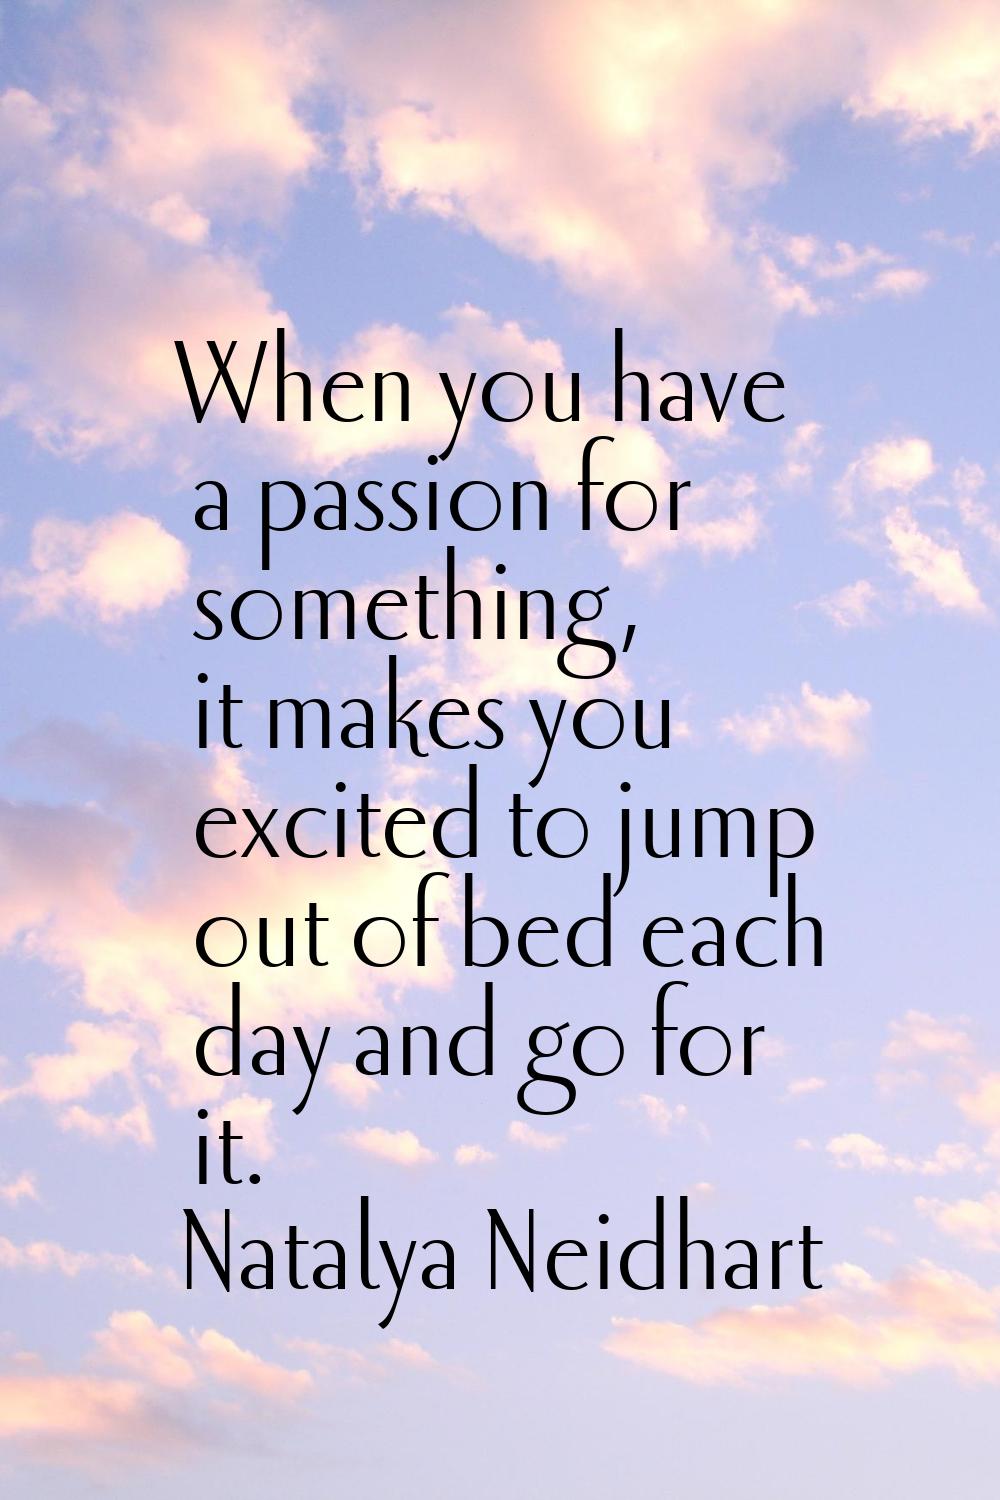 When you have a passion for something, it makes you excited to jump out of bed each day and go for 